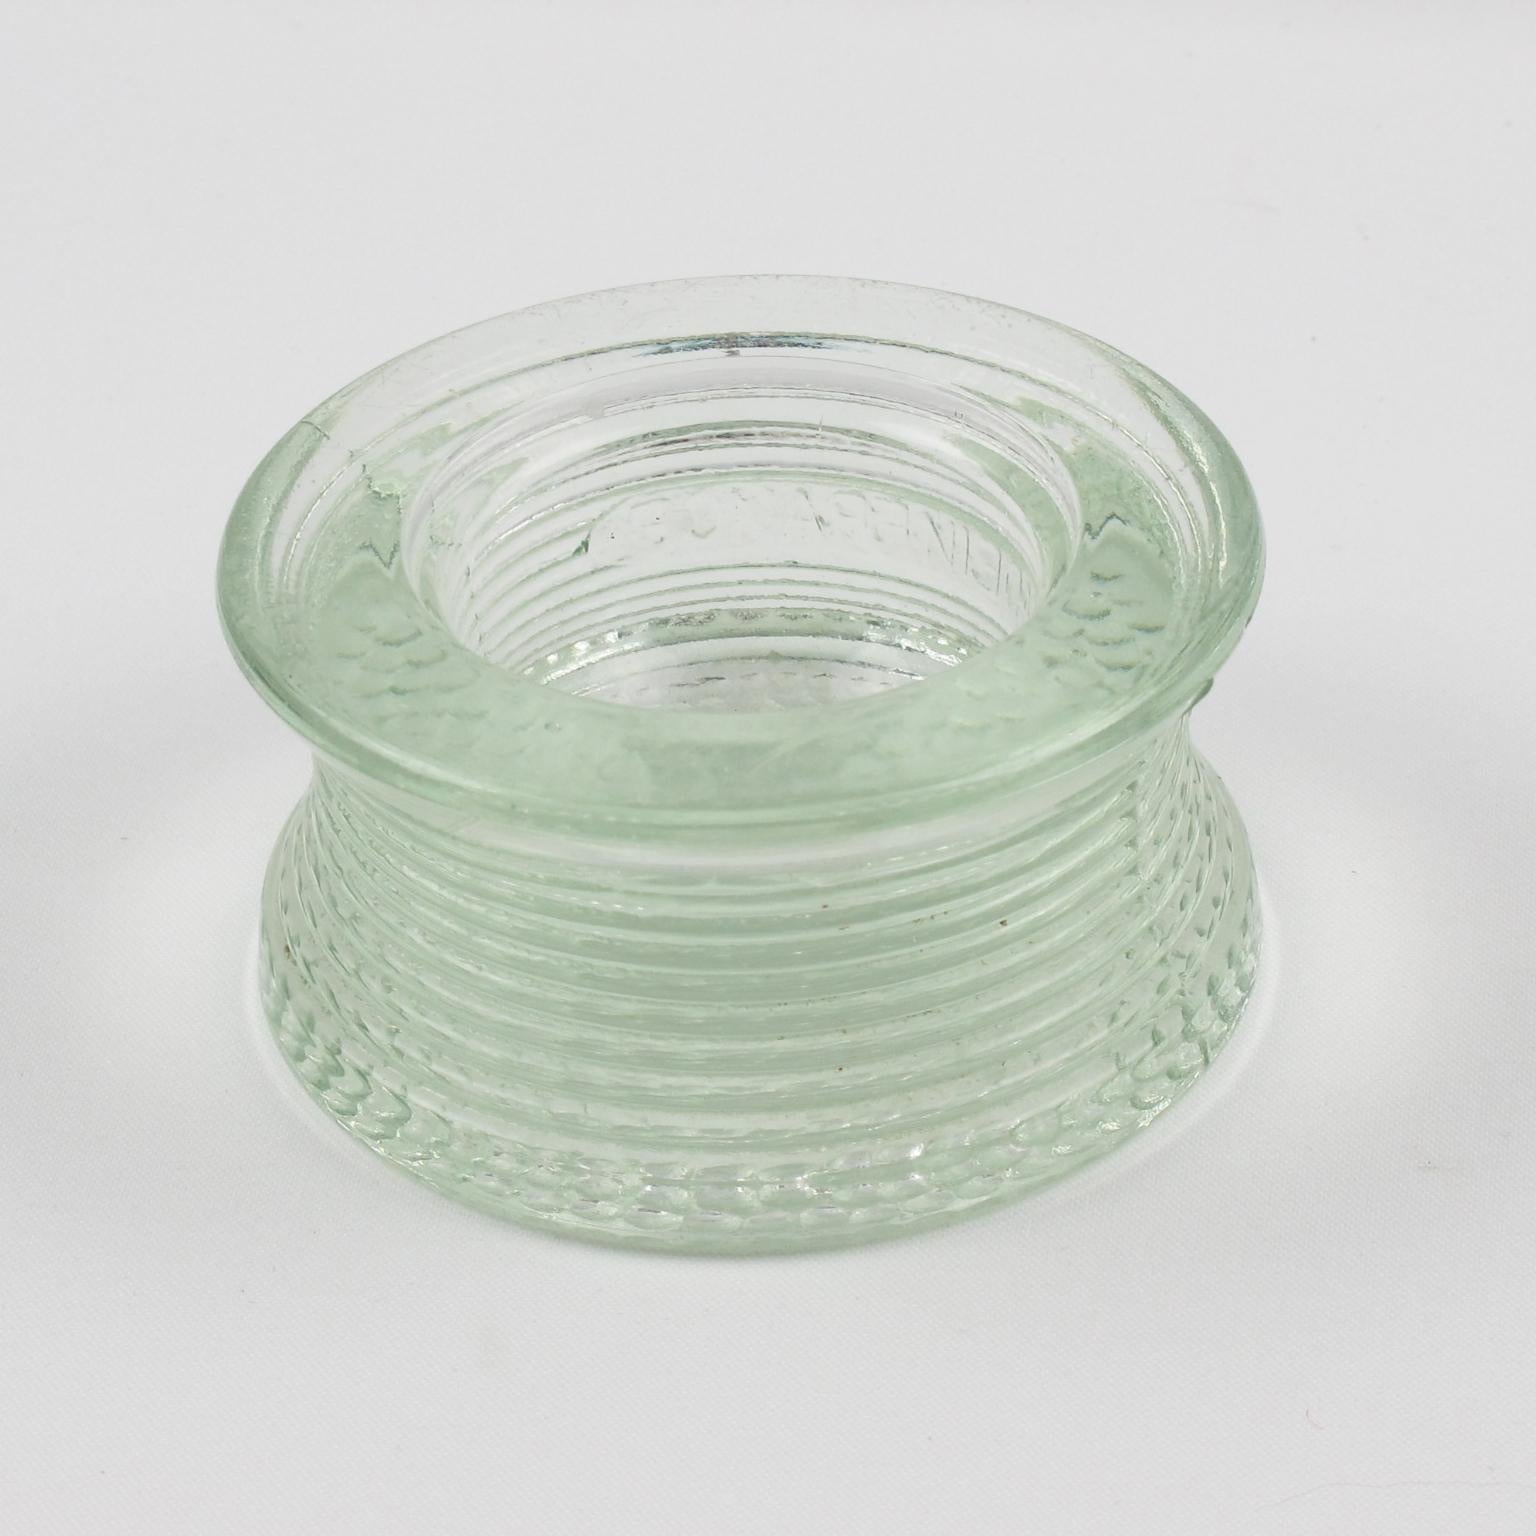 Industrial thick molded glass desktop accessory (desk tidy - ashtray - catchall) manufactured by Lumax, France. Original design by Le Corbusier. Engraved 'Made in France' on side. Lovely round shape with stripes.
Measurements: 3.94 inches diameter